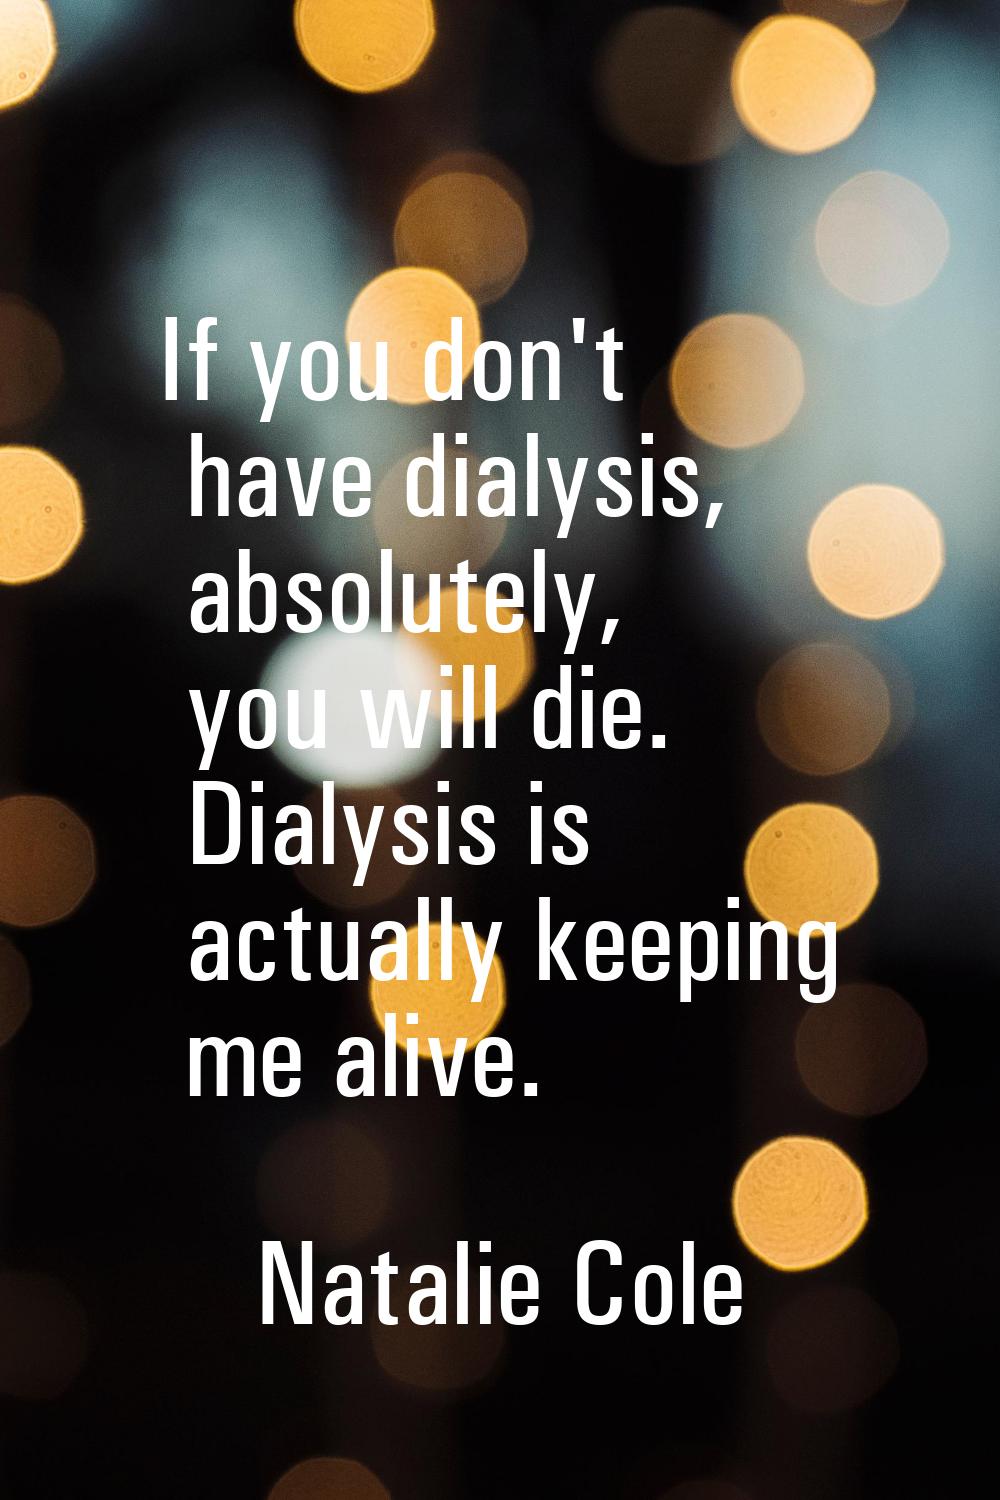 If you don't have dialysis, absolutely, you will die. Dialysis is actually keeping me alive.